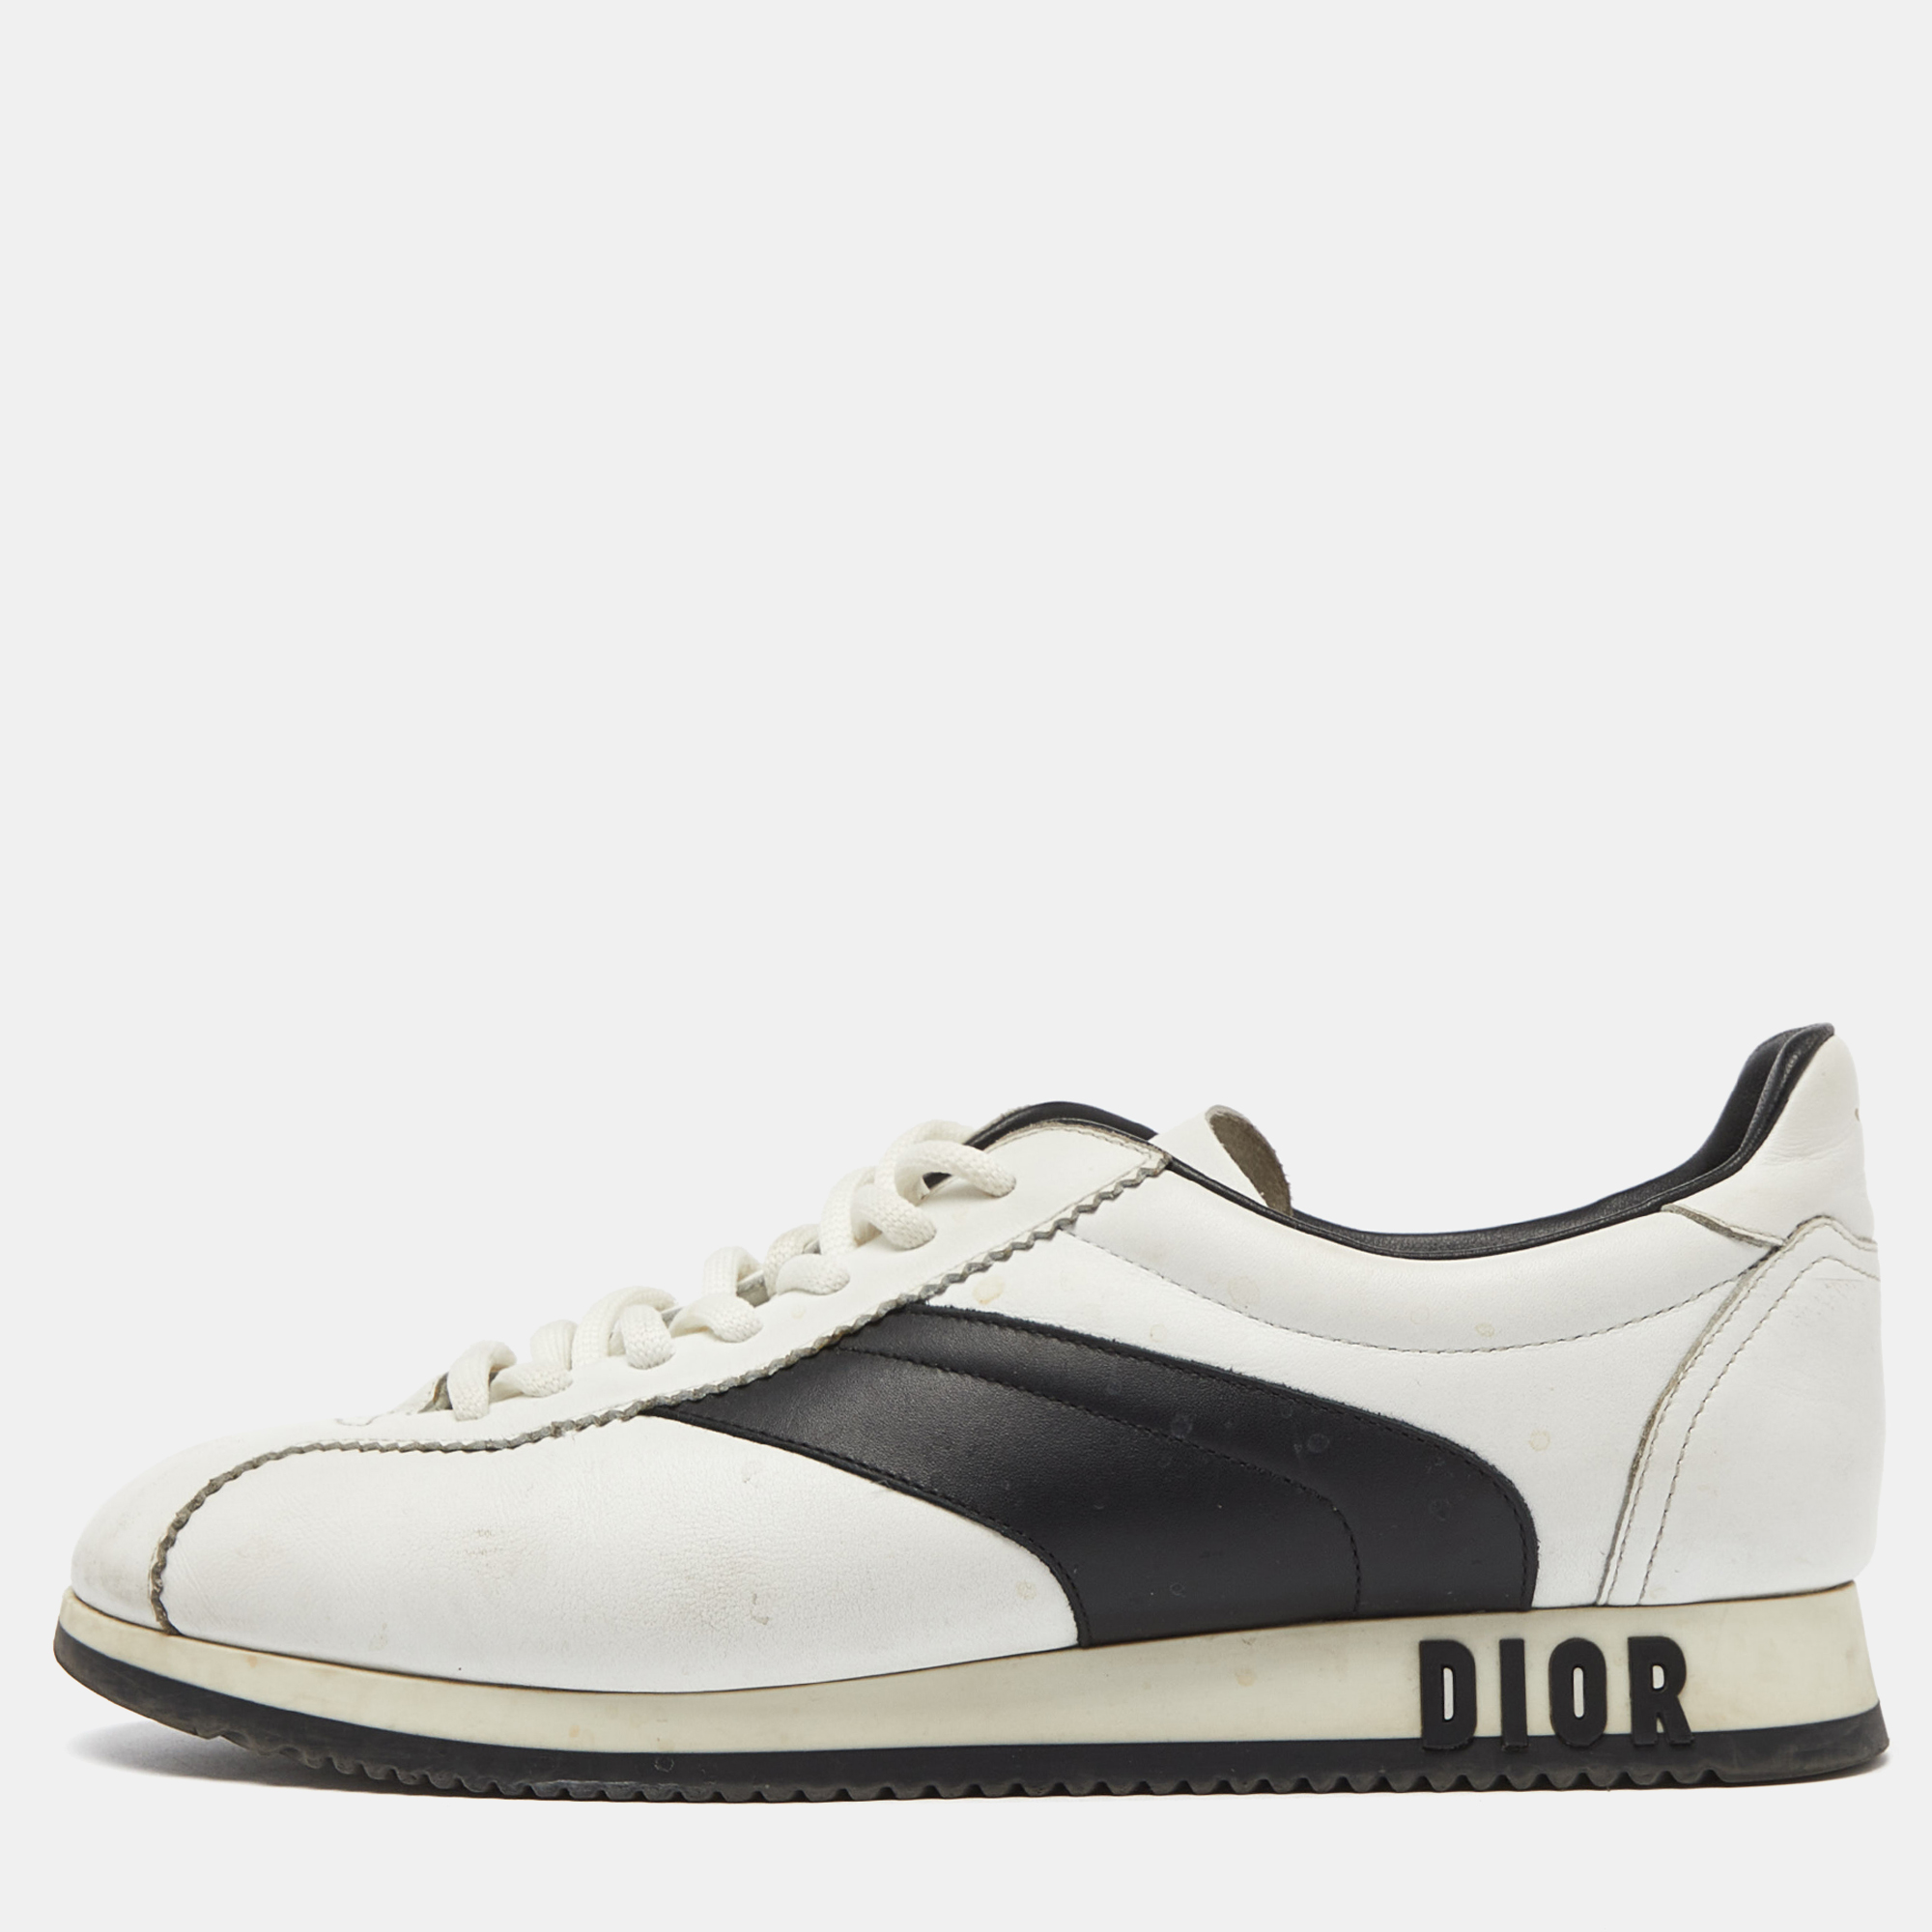 

Dior White/Black Leather Low Top Sneakers Size